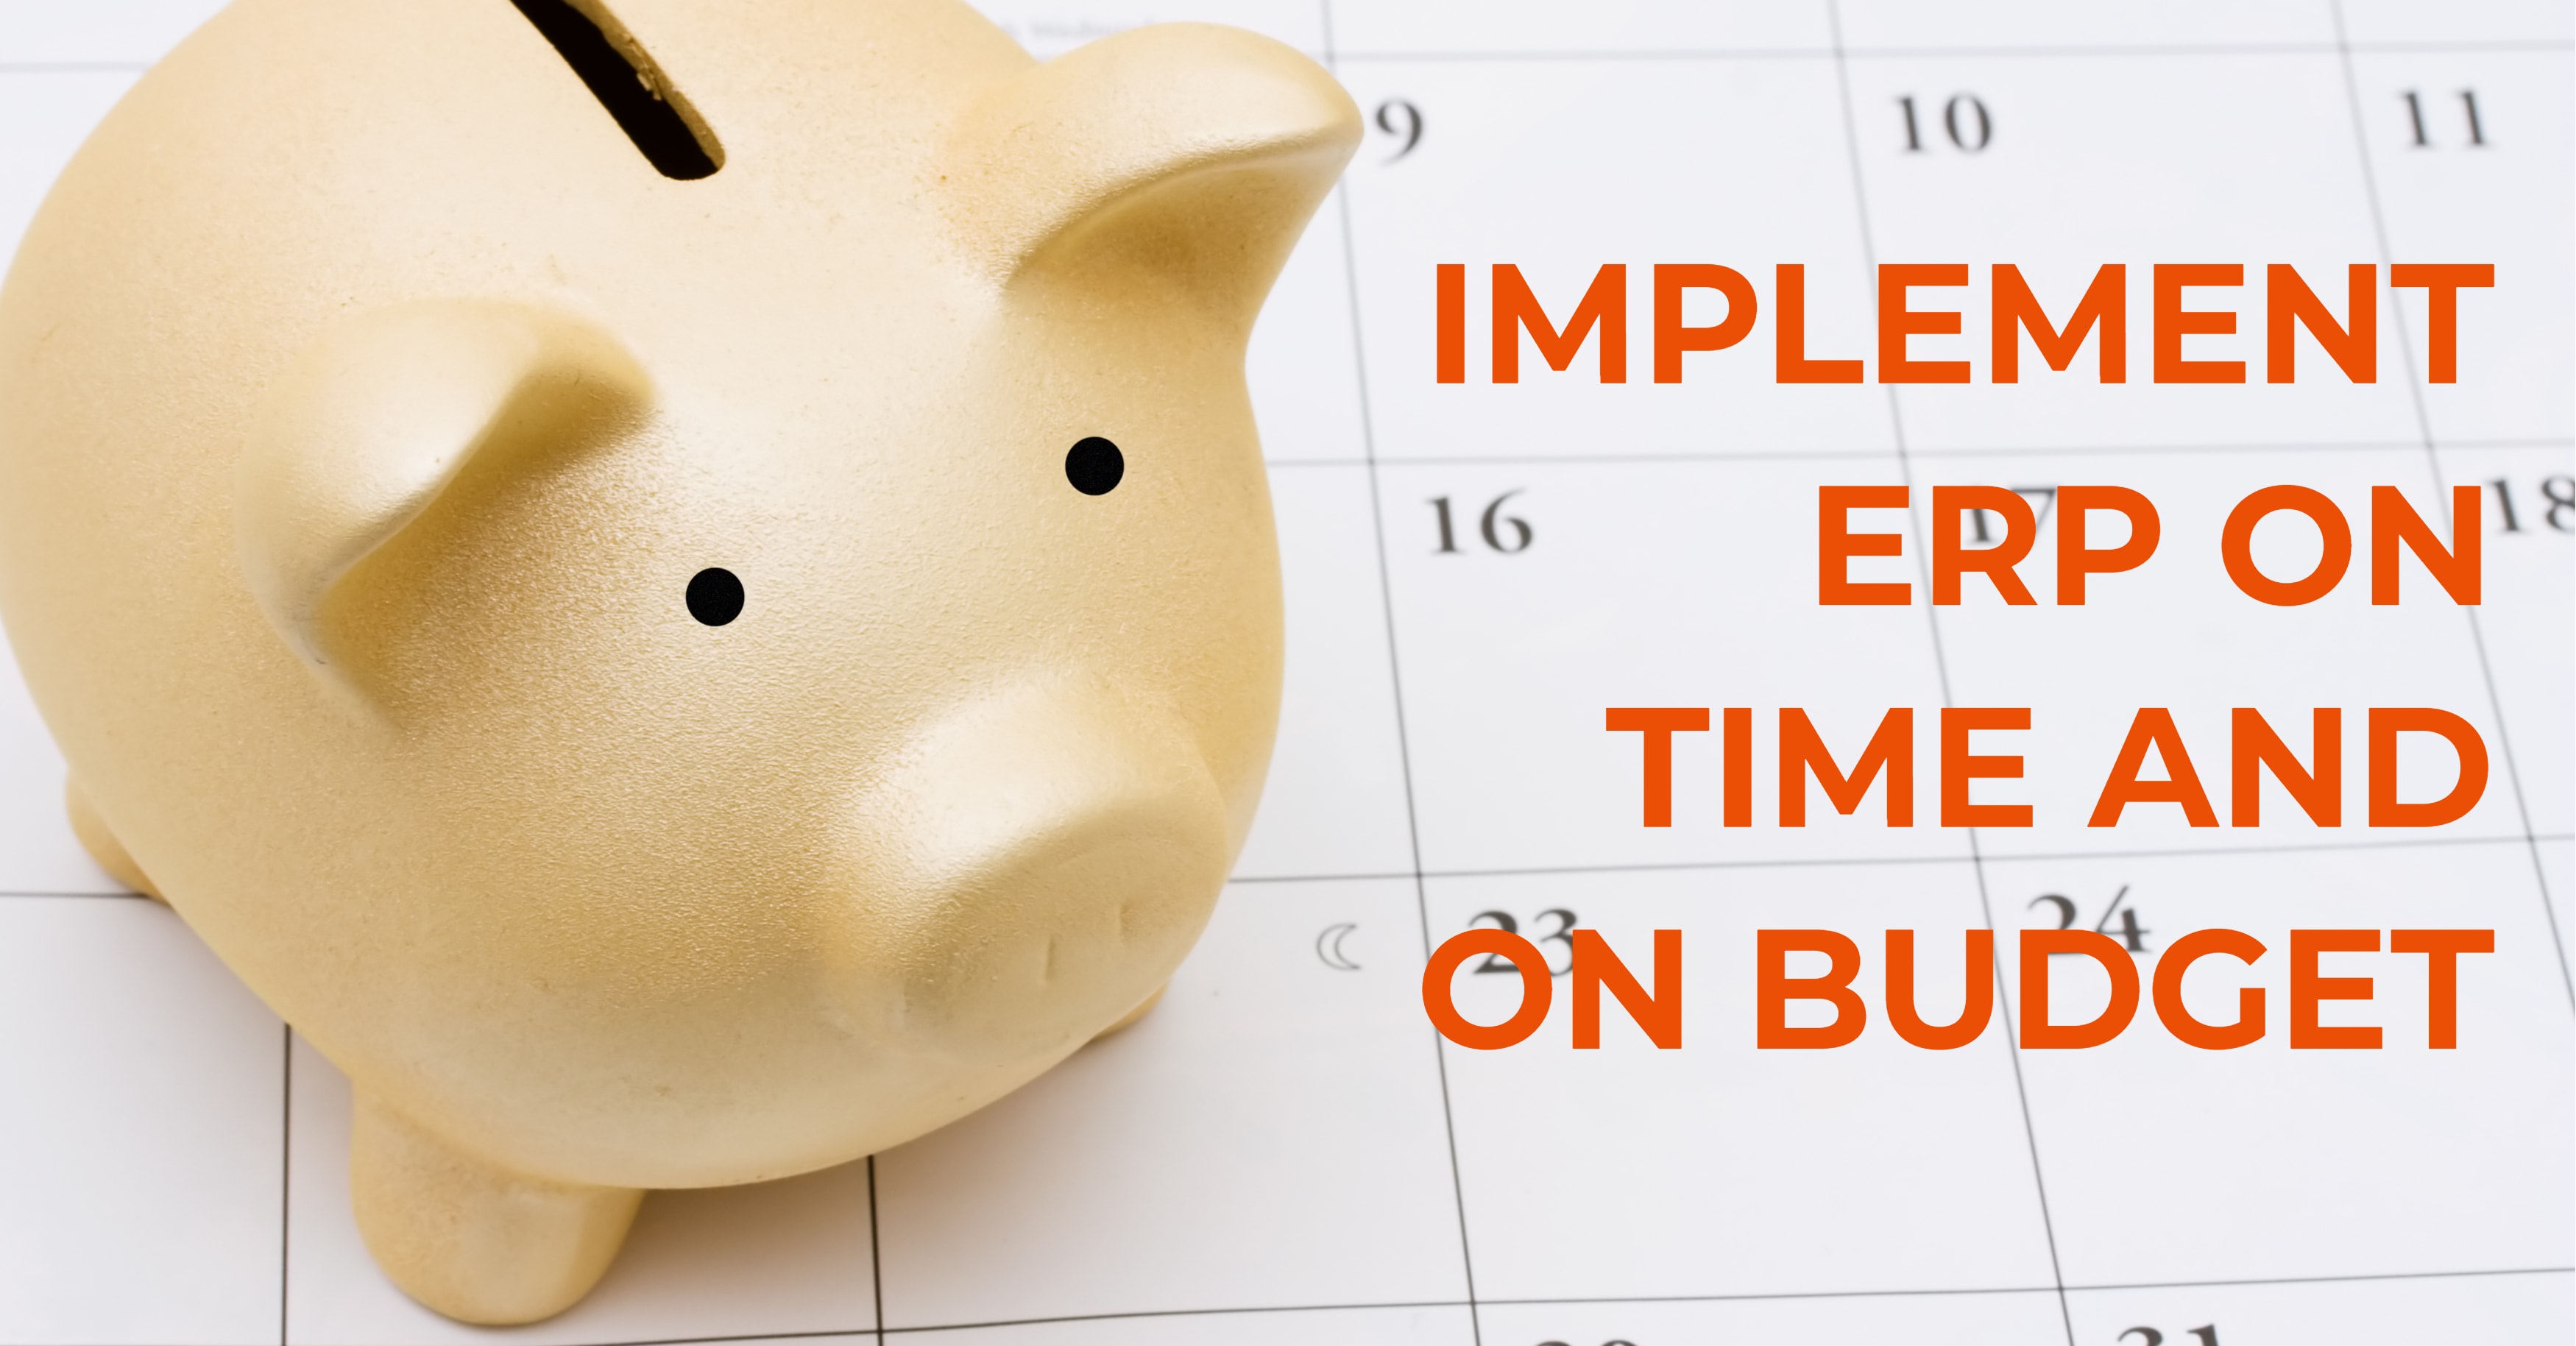 ERP On Time On Budget